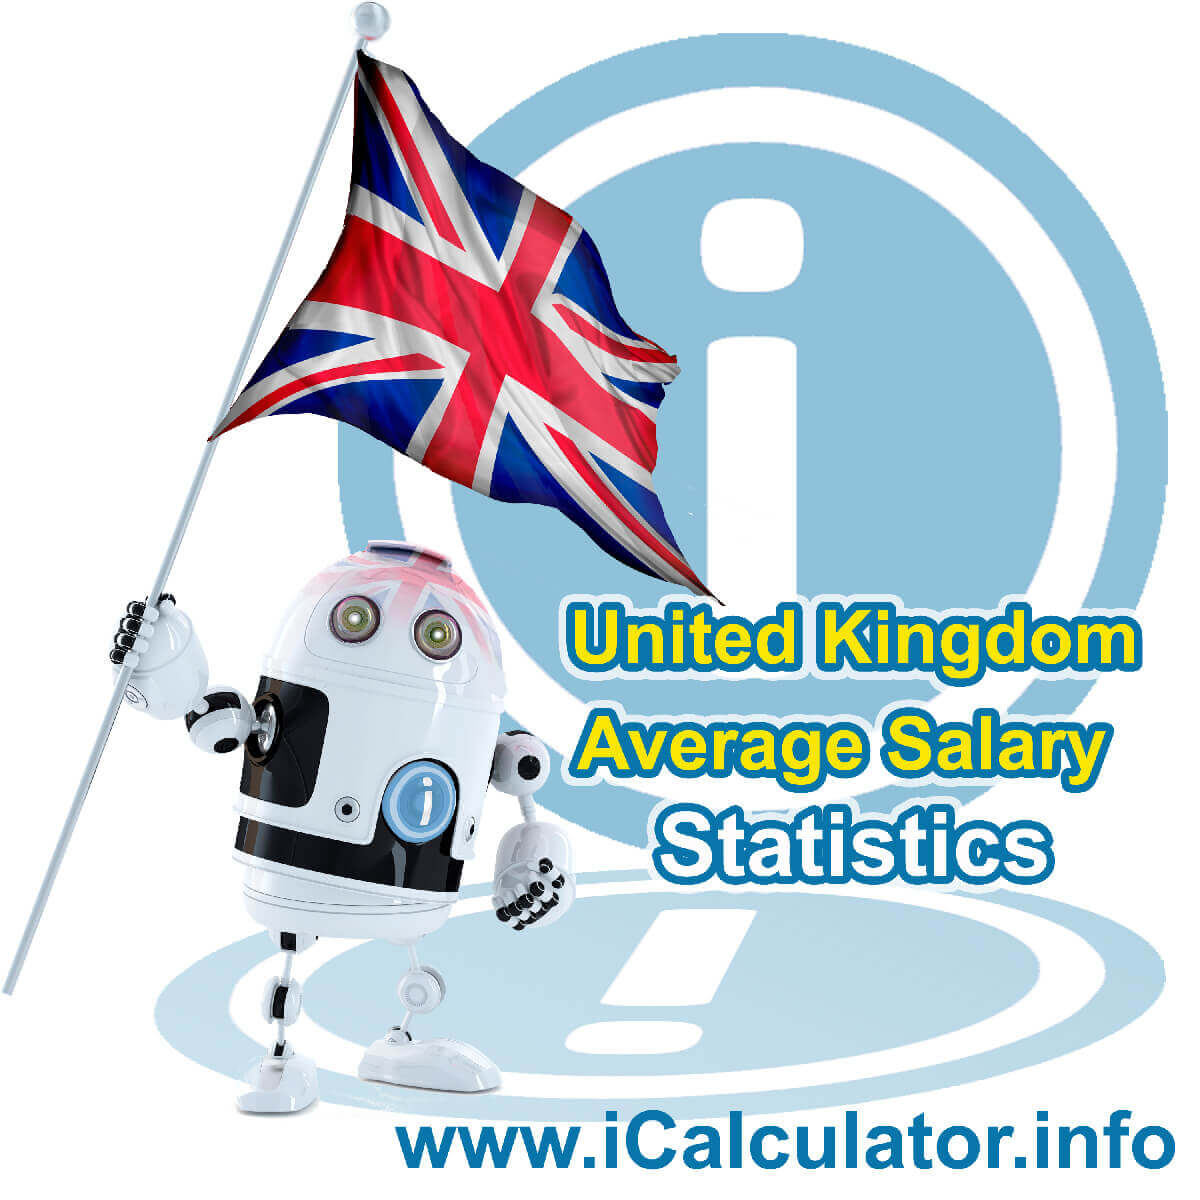 UK Average Salary in 2019. This image shows the United Kingdom flag and information relating to the salary statistics and average salary in the UK in 2019